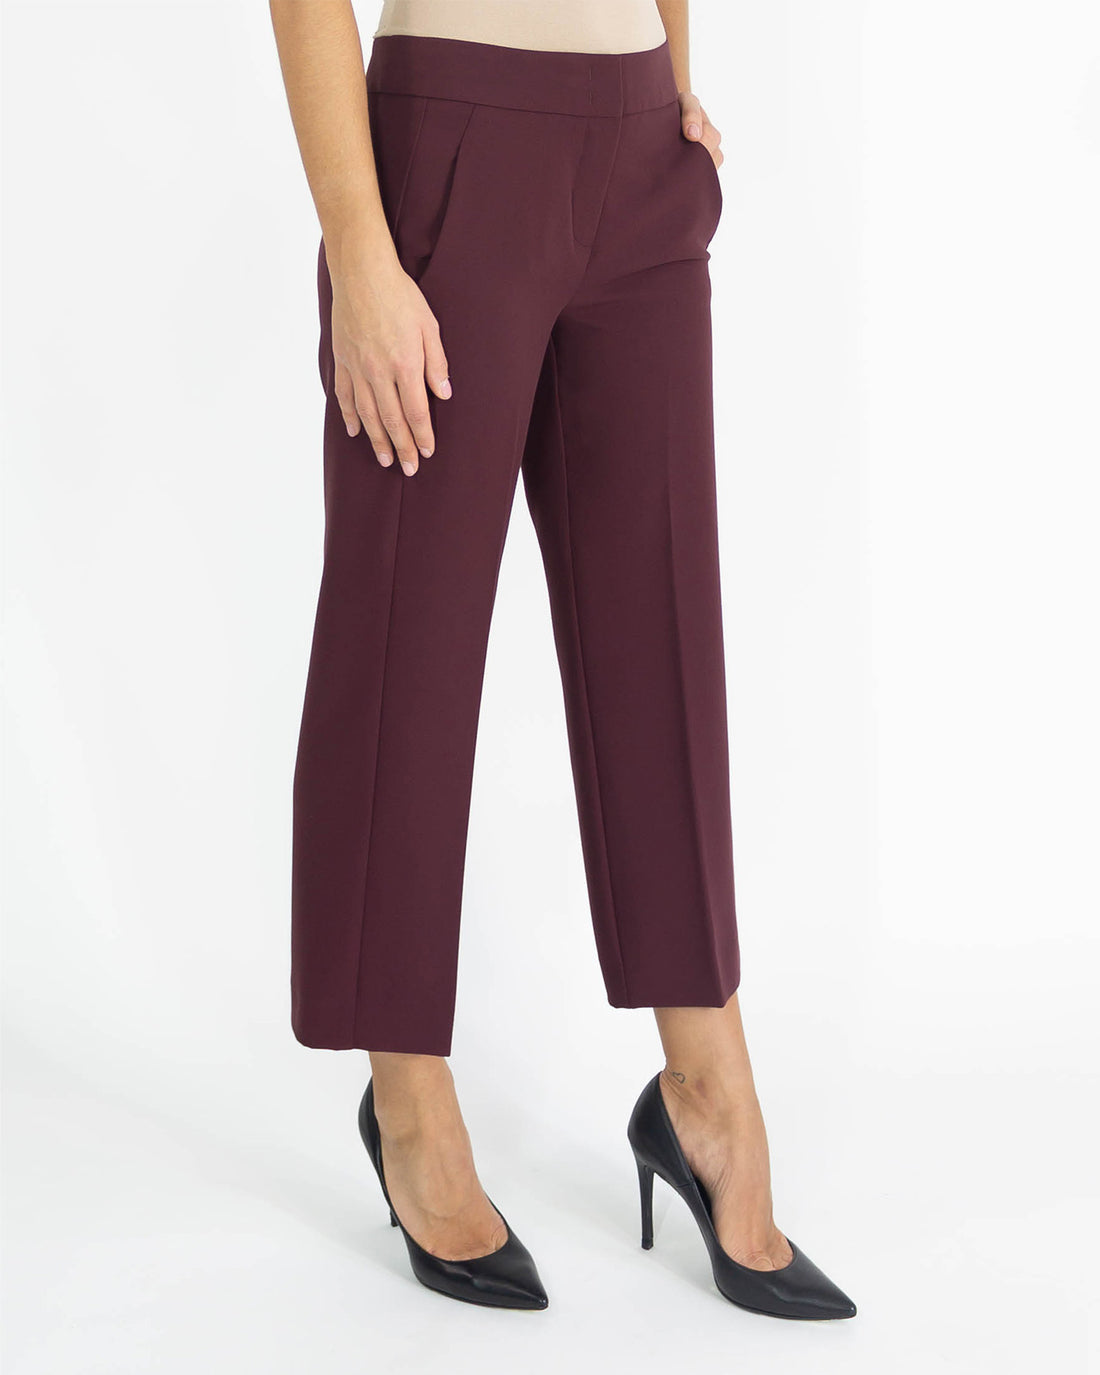 Elegant cropped trousers